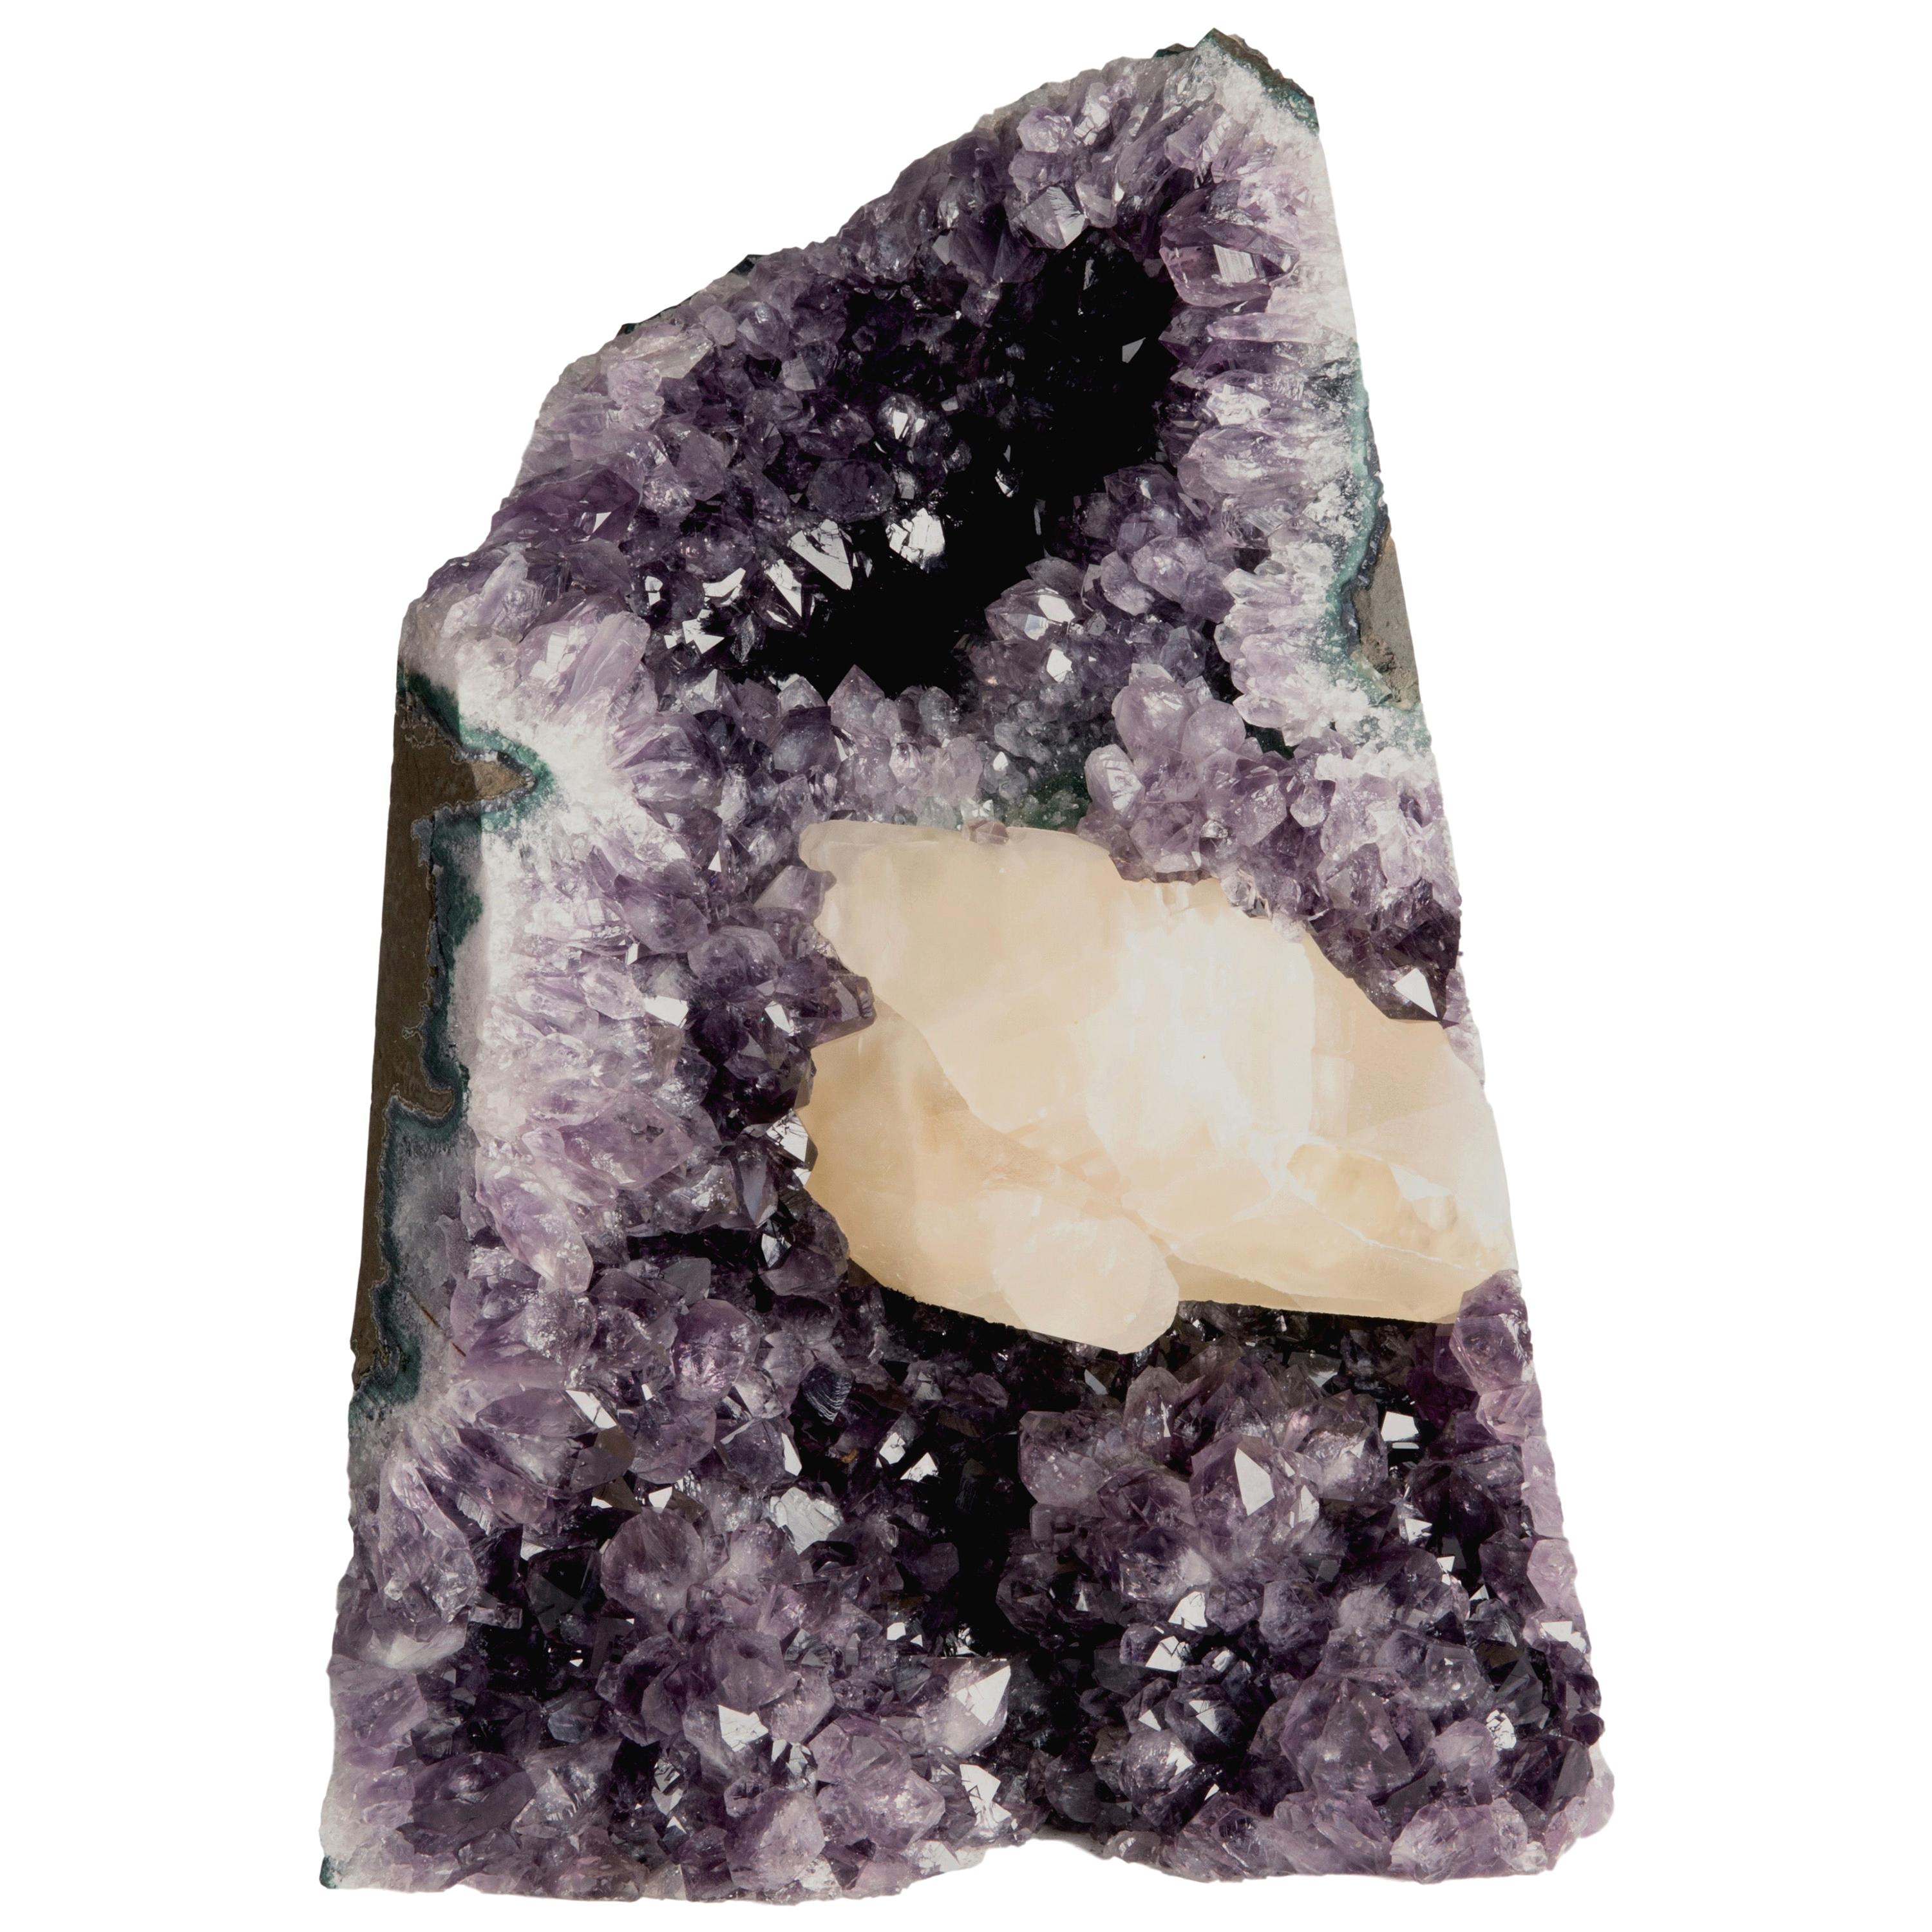 Rough Amethyst Calcite Formation Surrounded by Green Celadonite and White Quartz For Sale